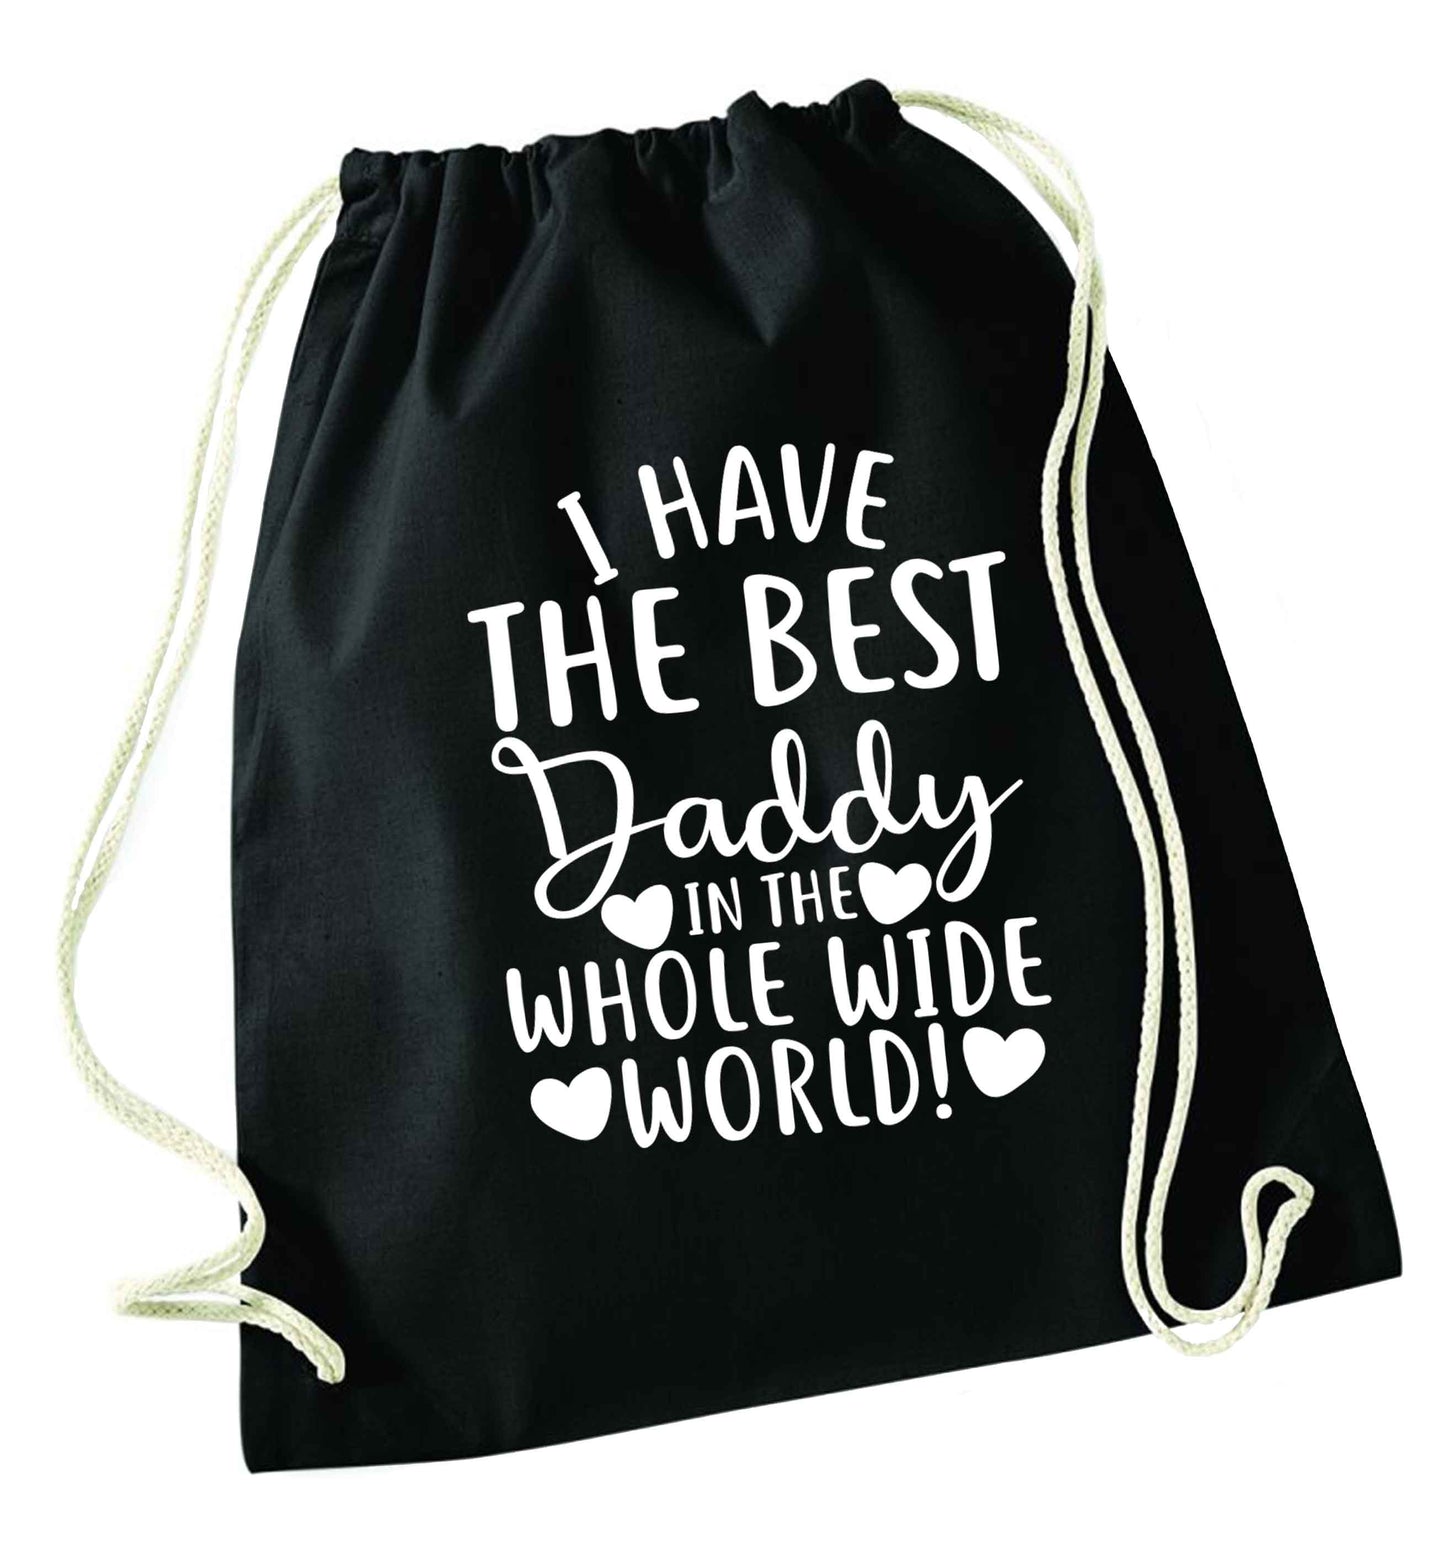 I have the best daddy in the whole wide world black drawstring bag